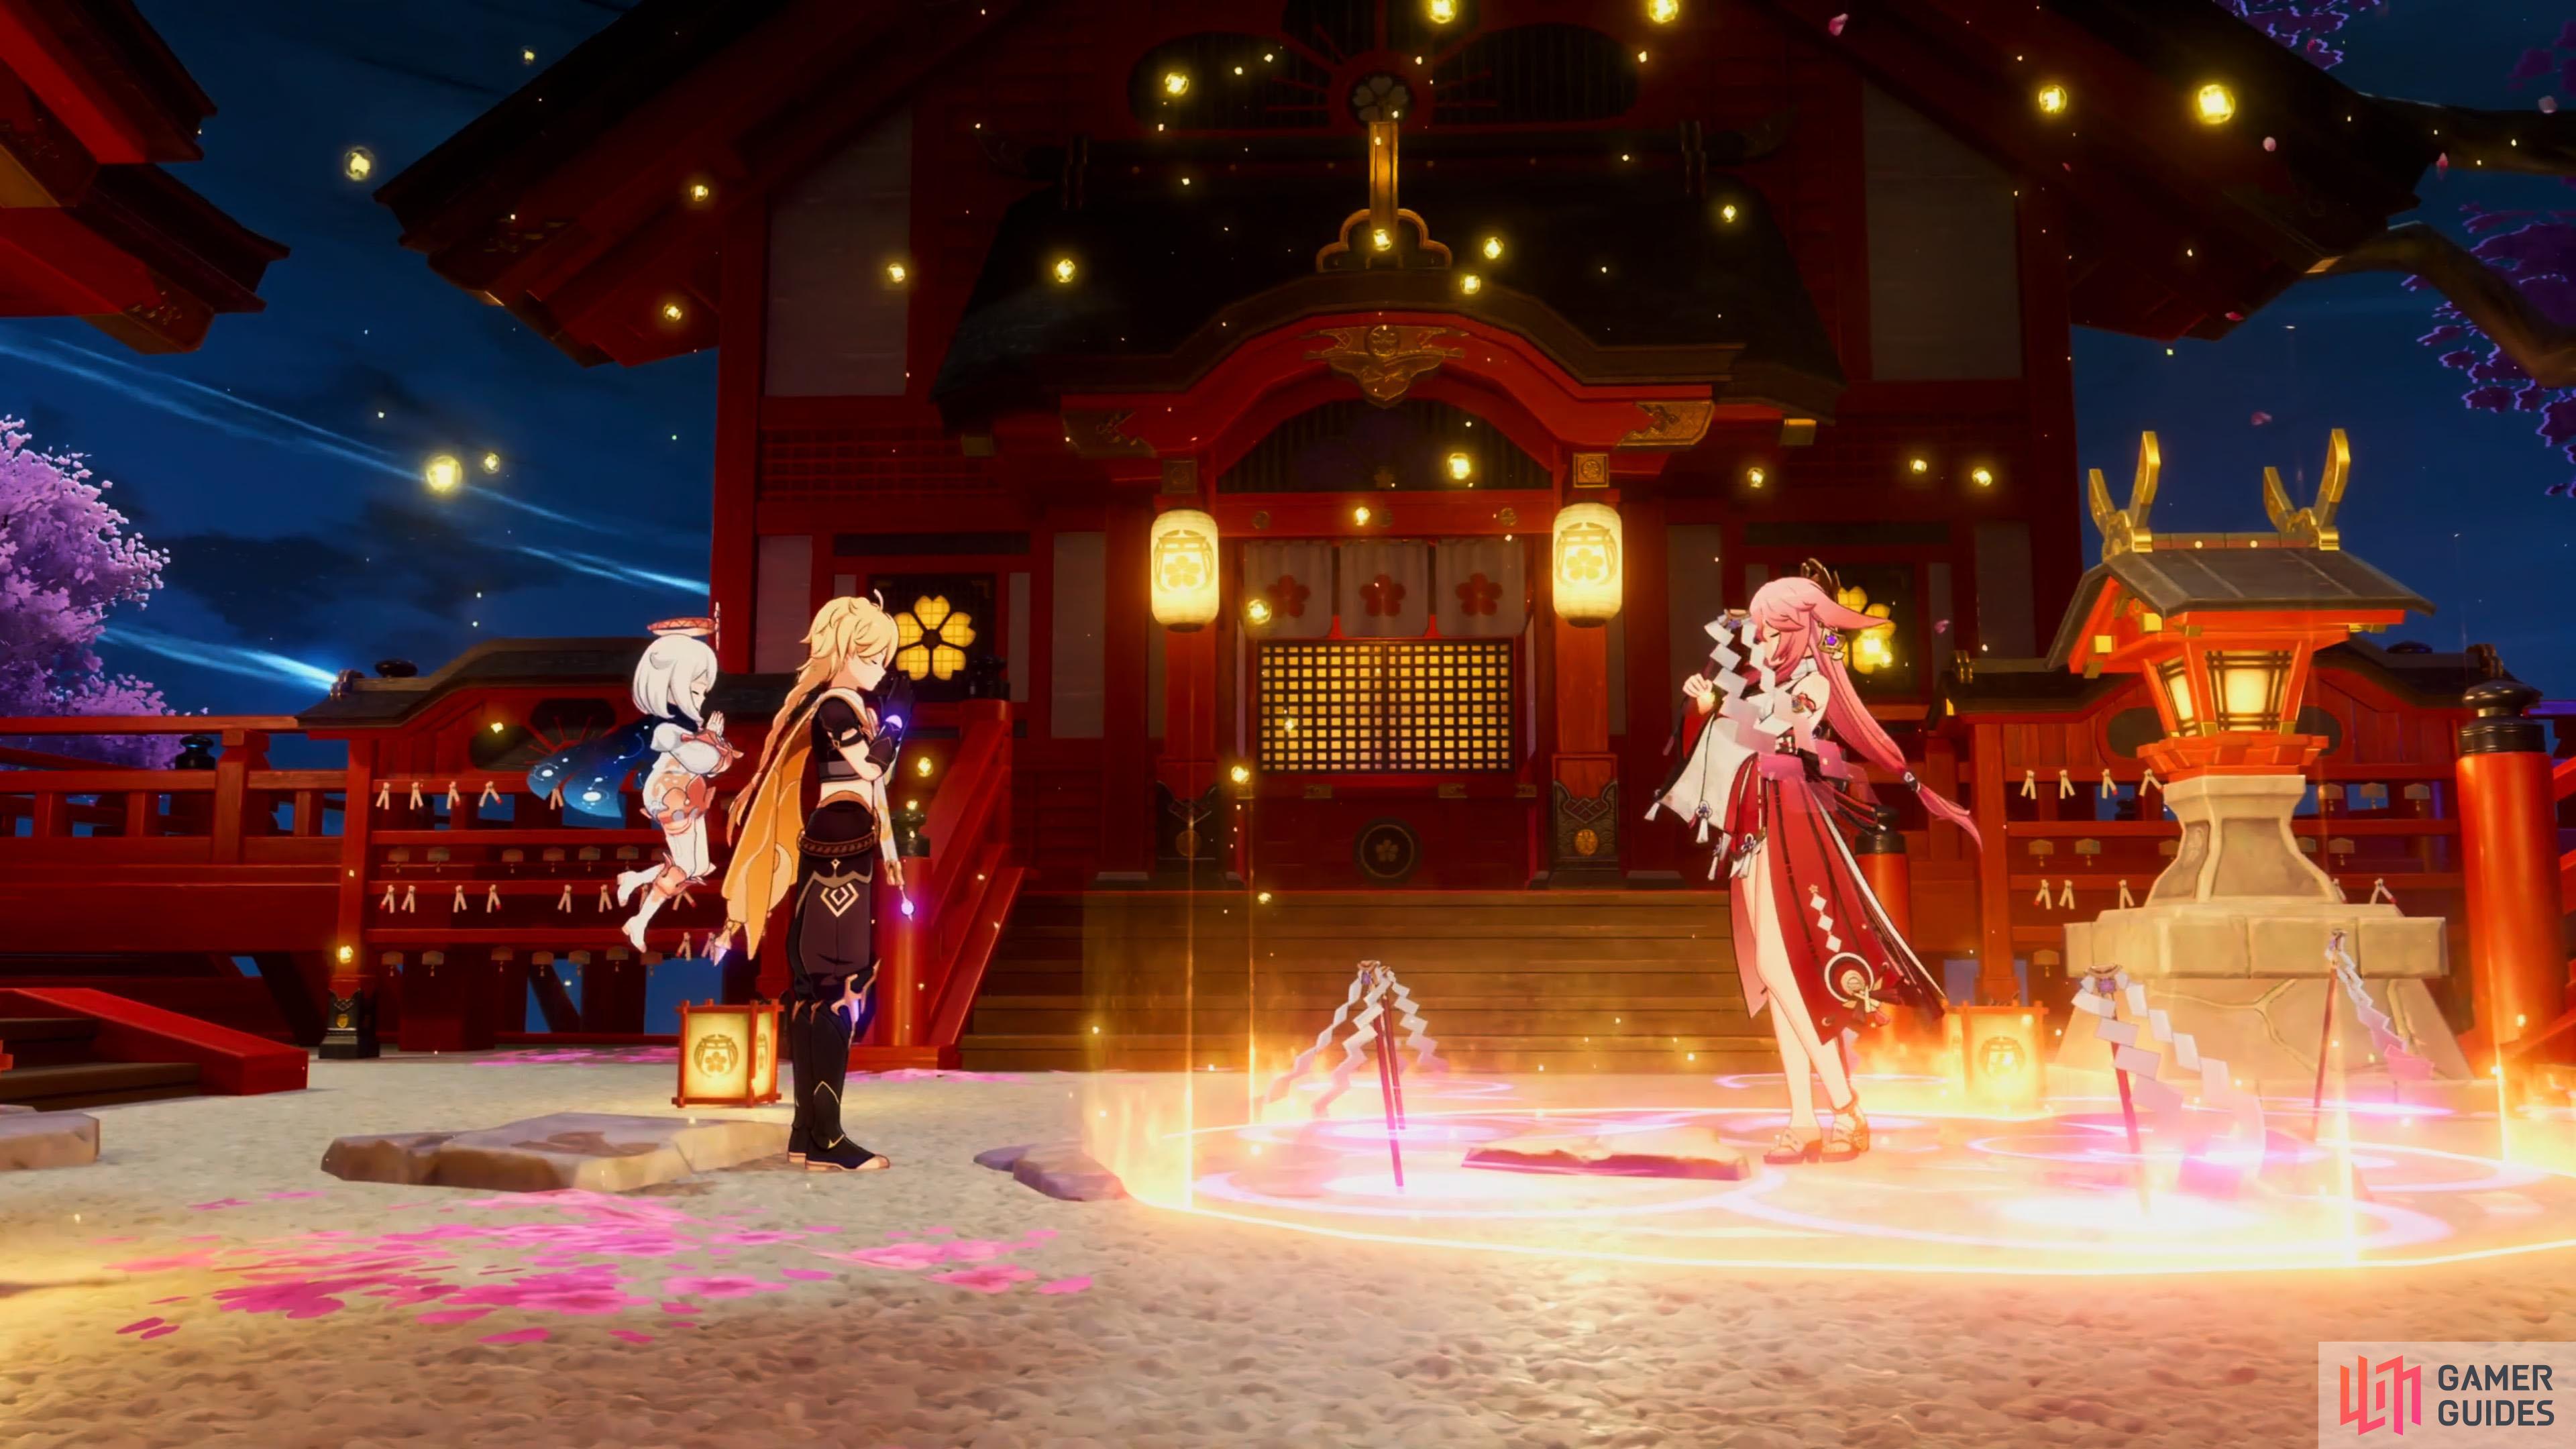 The Traveler, Paimon, and Yae Miko performing the “Moonless Night” ritual.